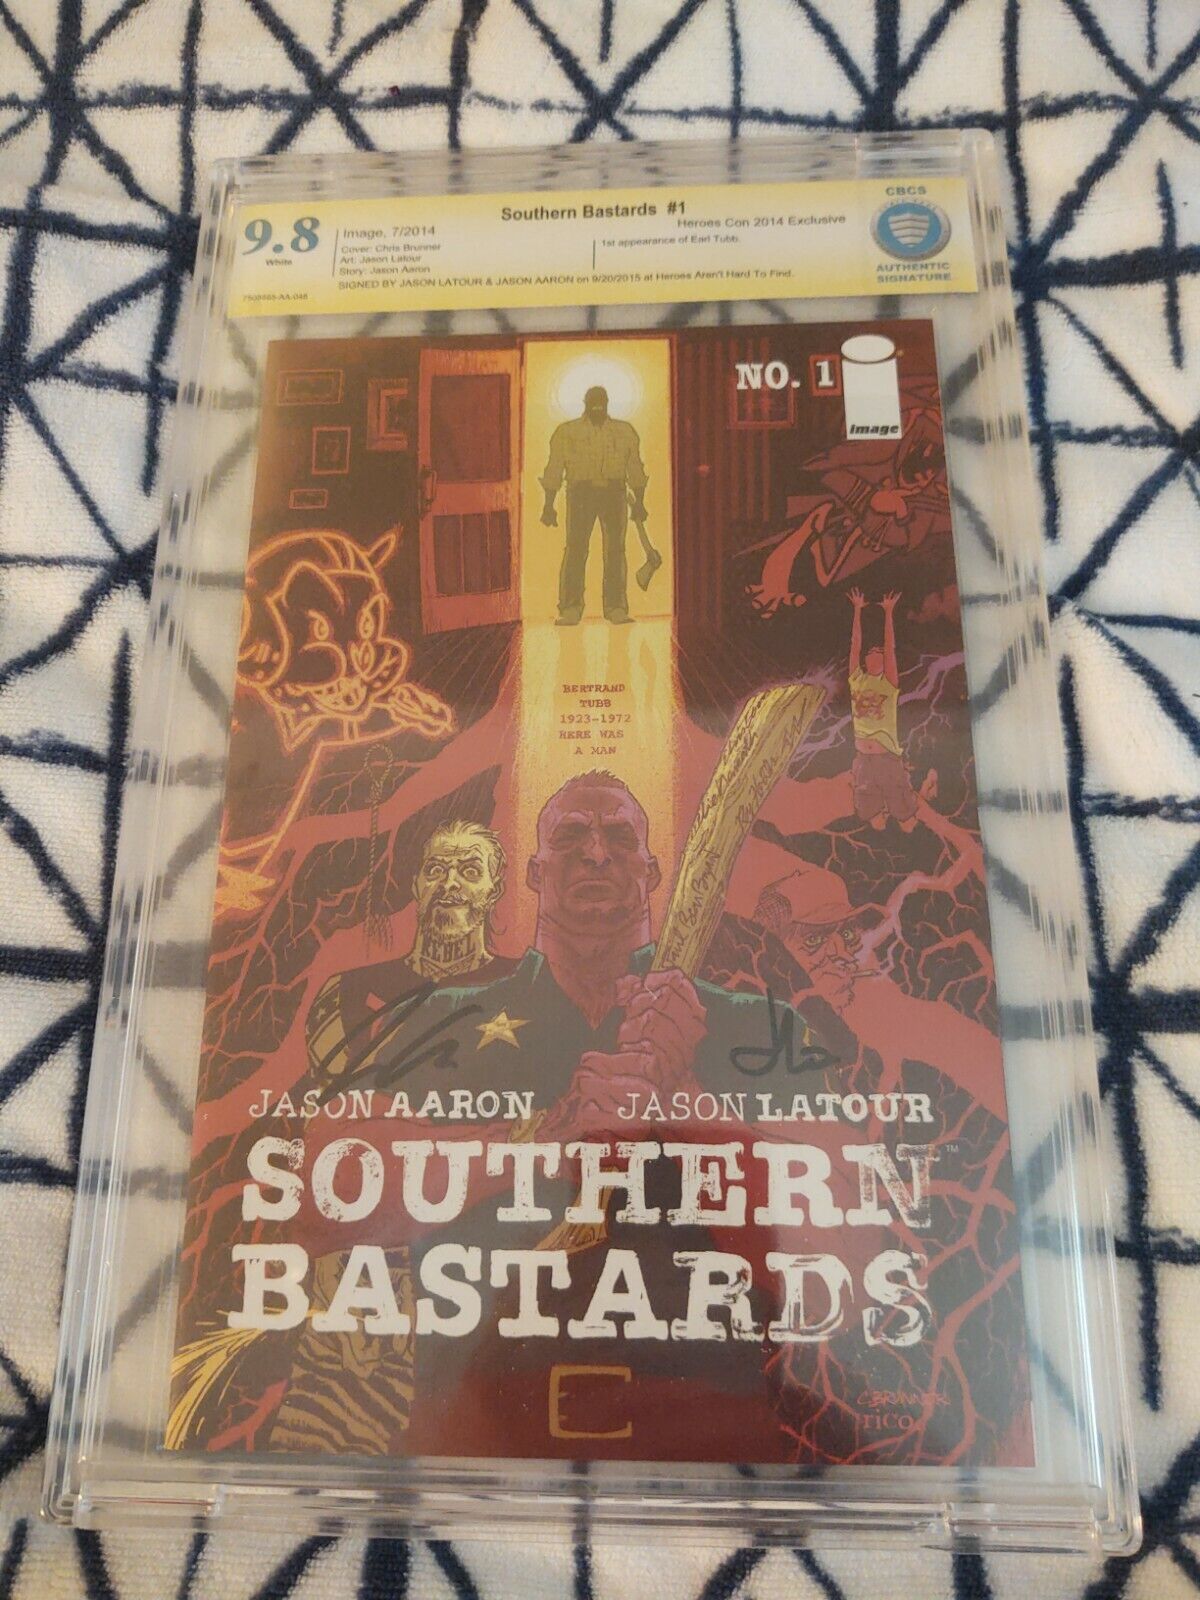 Southern Bastards #1 HEROES Cbcs 9.8 SS 2014 - 2x SIGNED - Image Comics